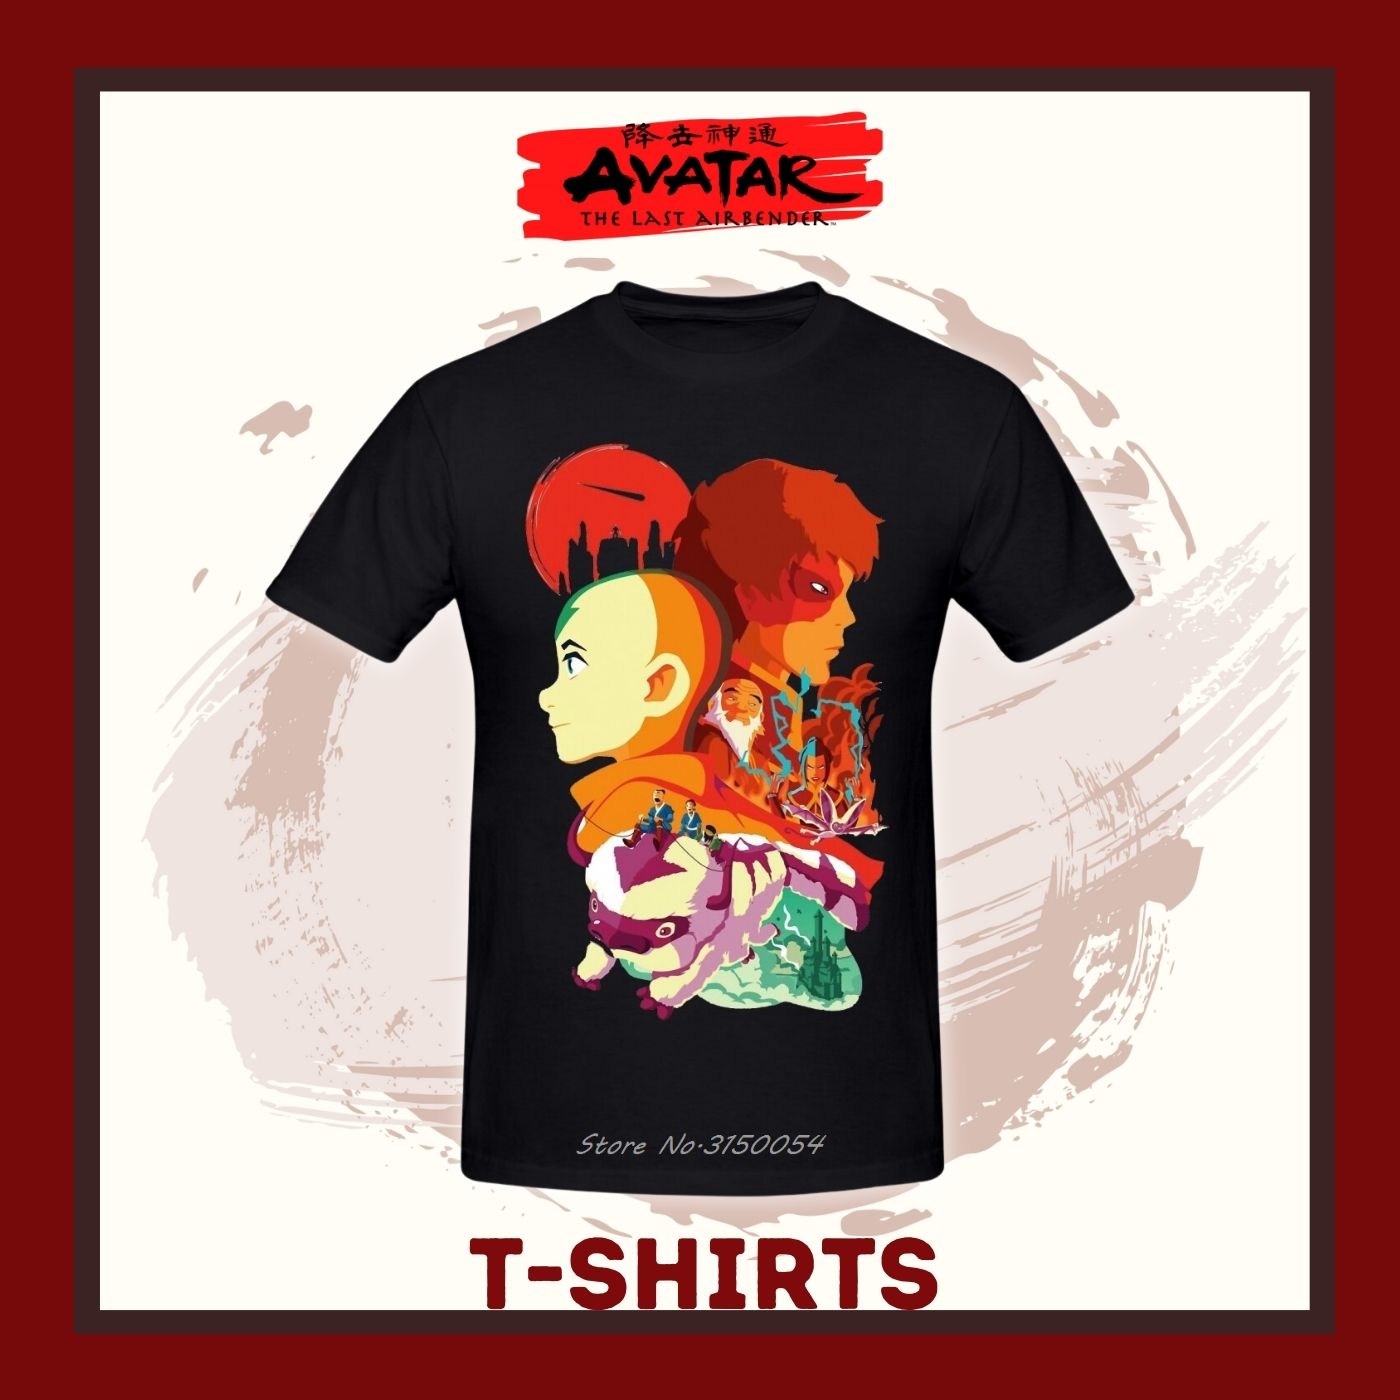 Avatar The Last Airbender Official Merch: Dress Like a Bender